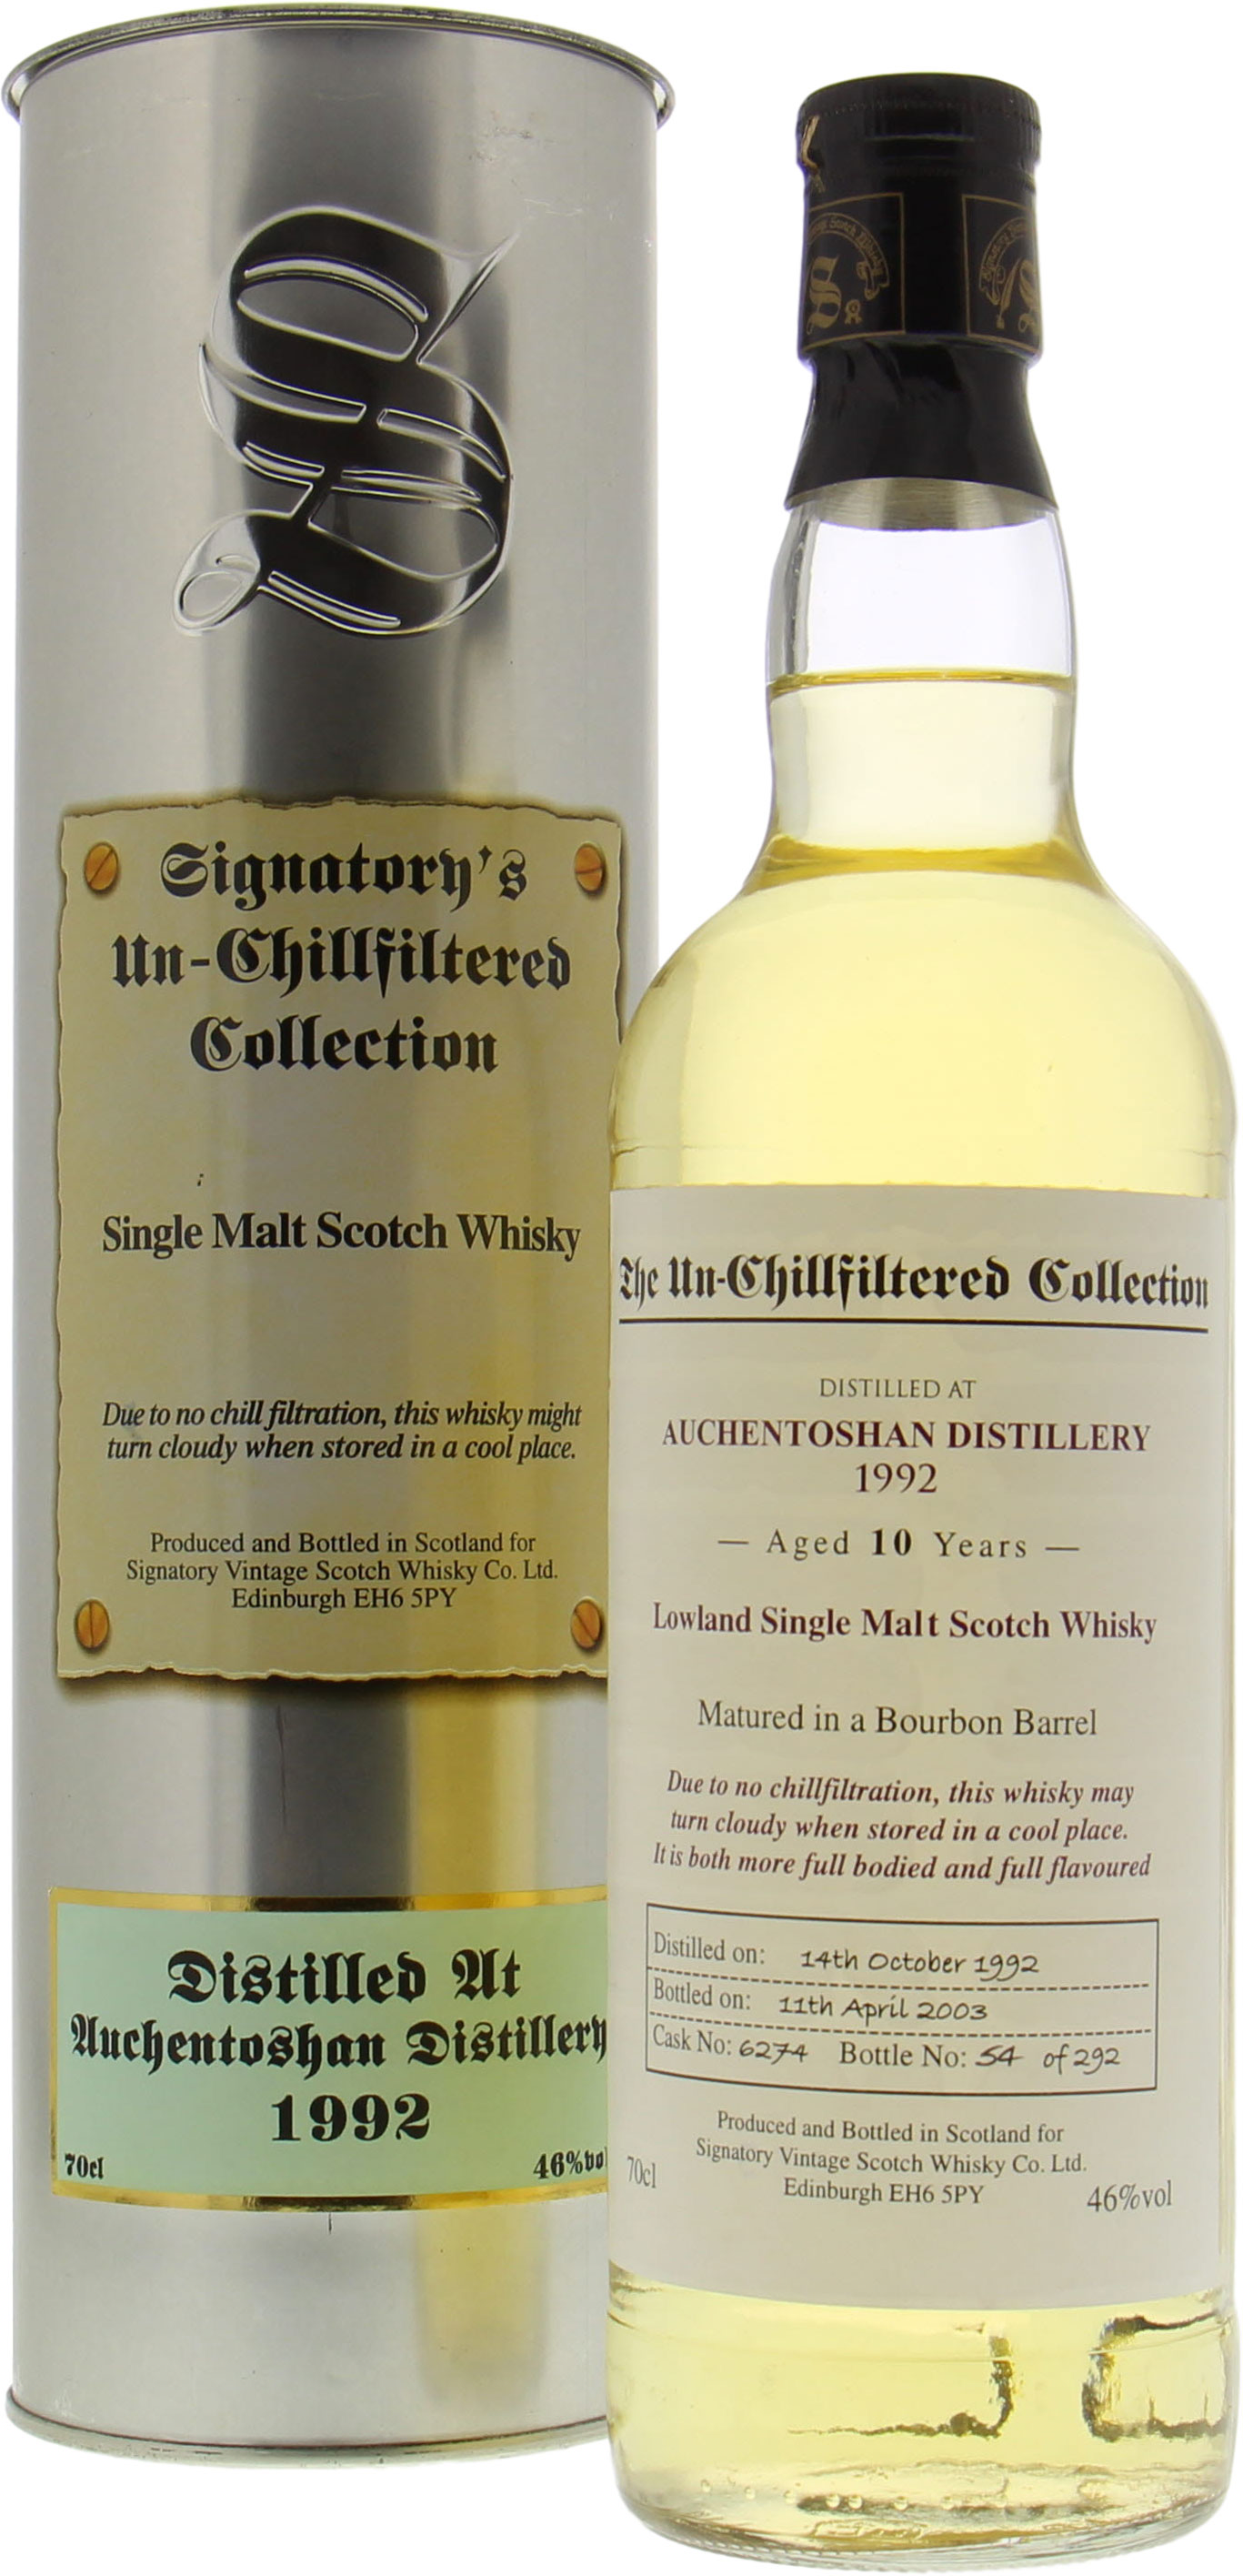 Auchentoshan - 10 Years Old Signatory Un-Chillfiltered Collection 46% 1992